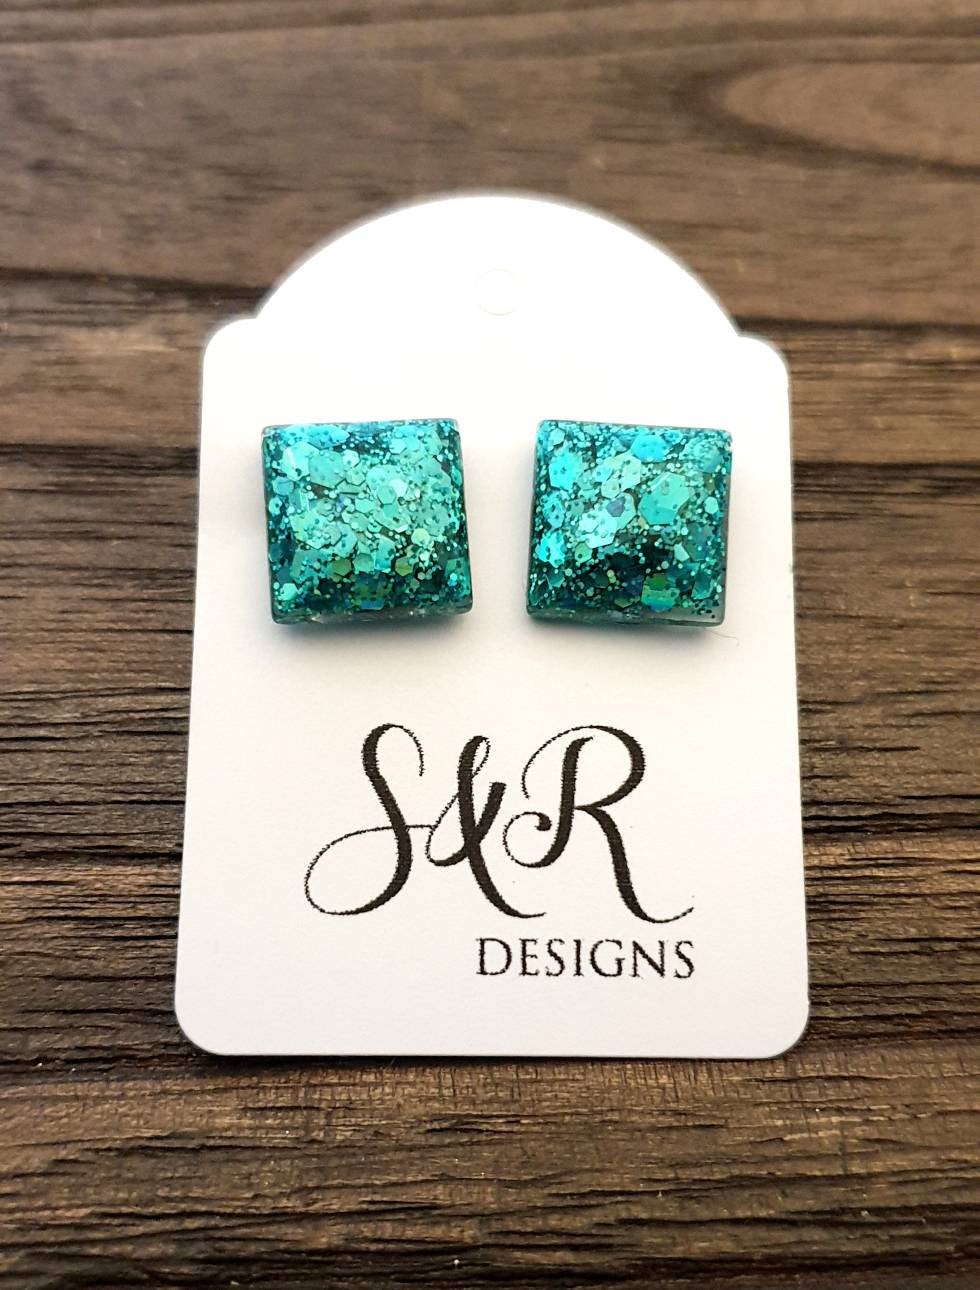 Square Resin Stud Earrings, Teal Glitter Square Earrings made with Stainless Steel. 12mm